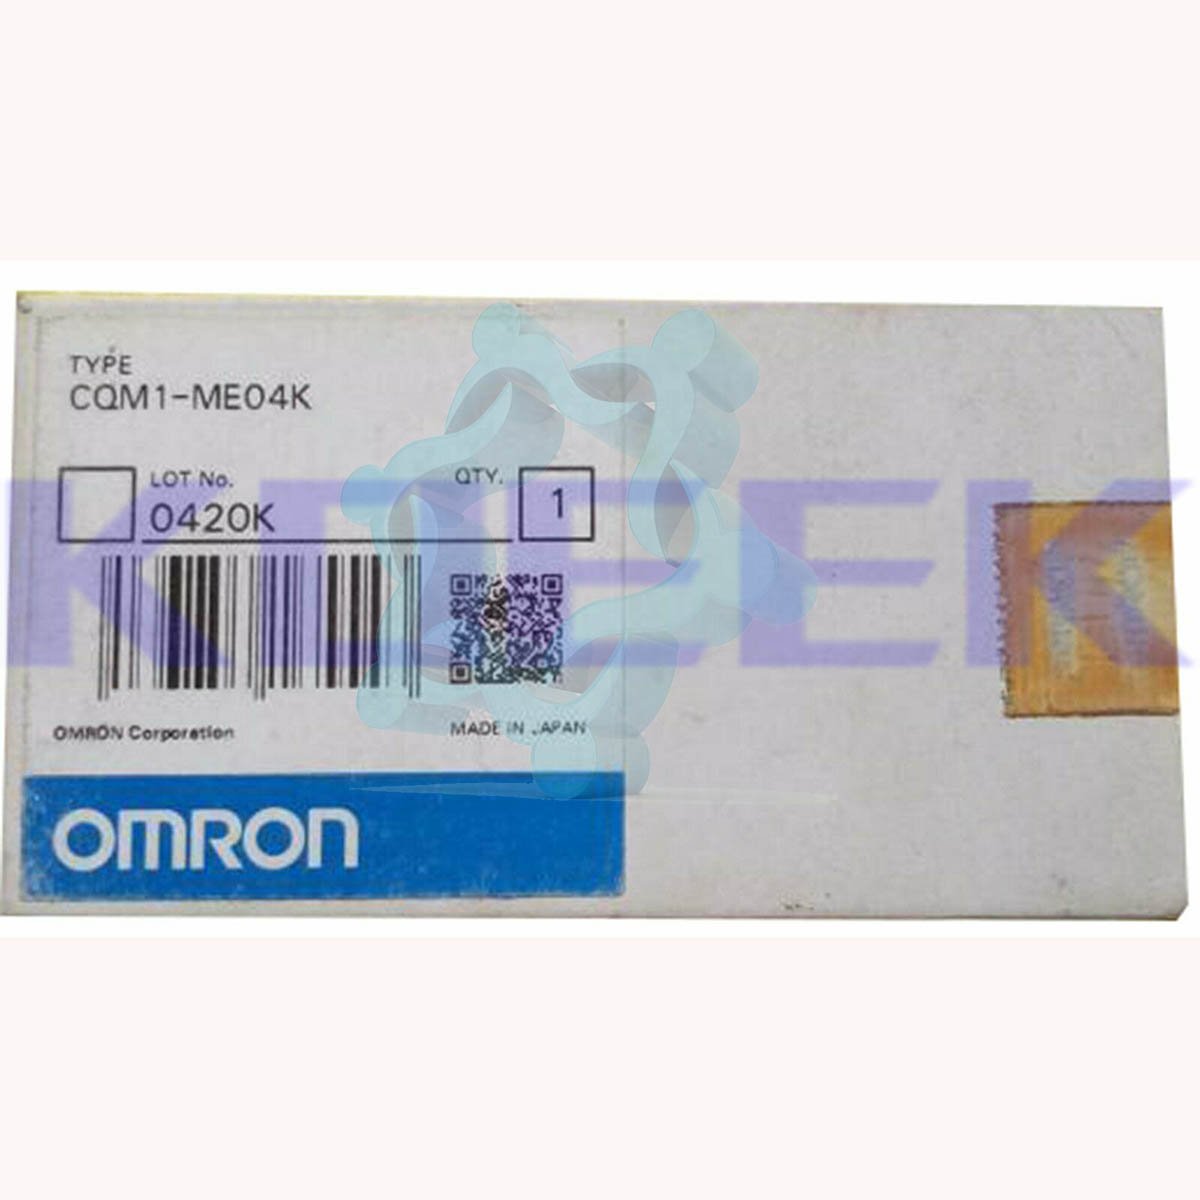 CQM1-ME04K KOEED 101-200, 80%, import_2020_10_10_031751, Omron, Other